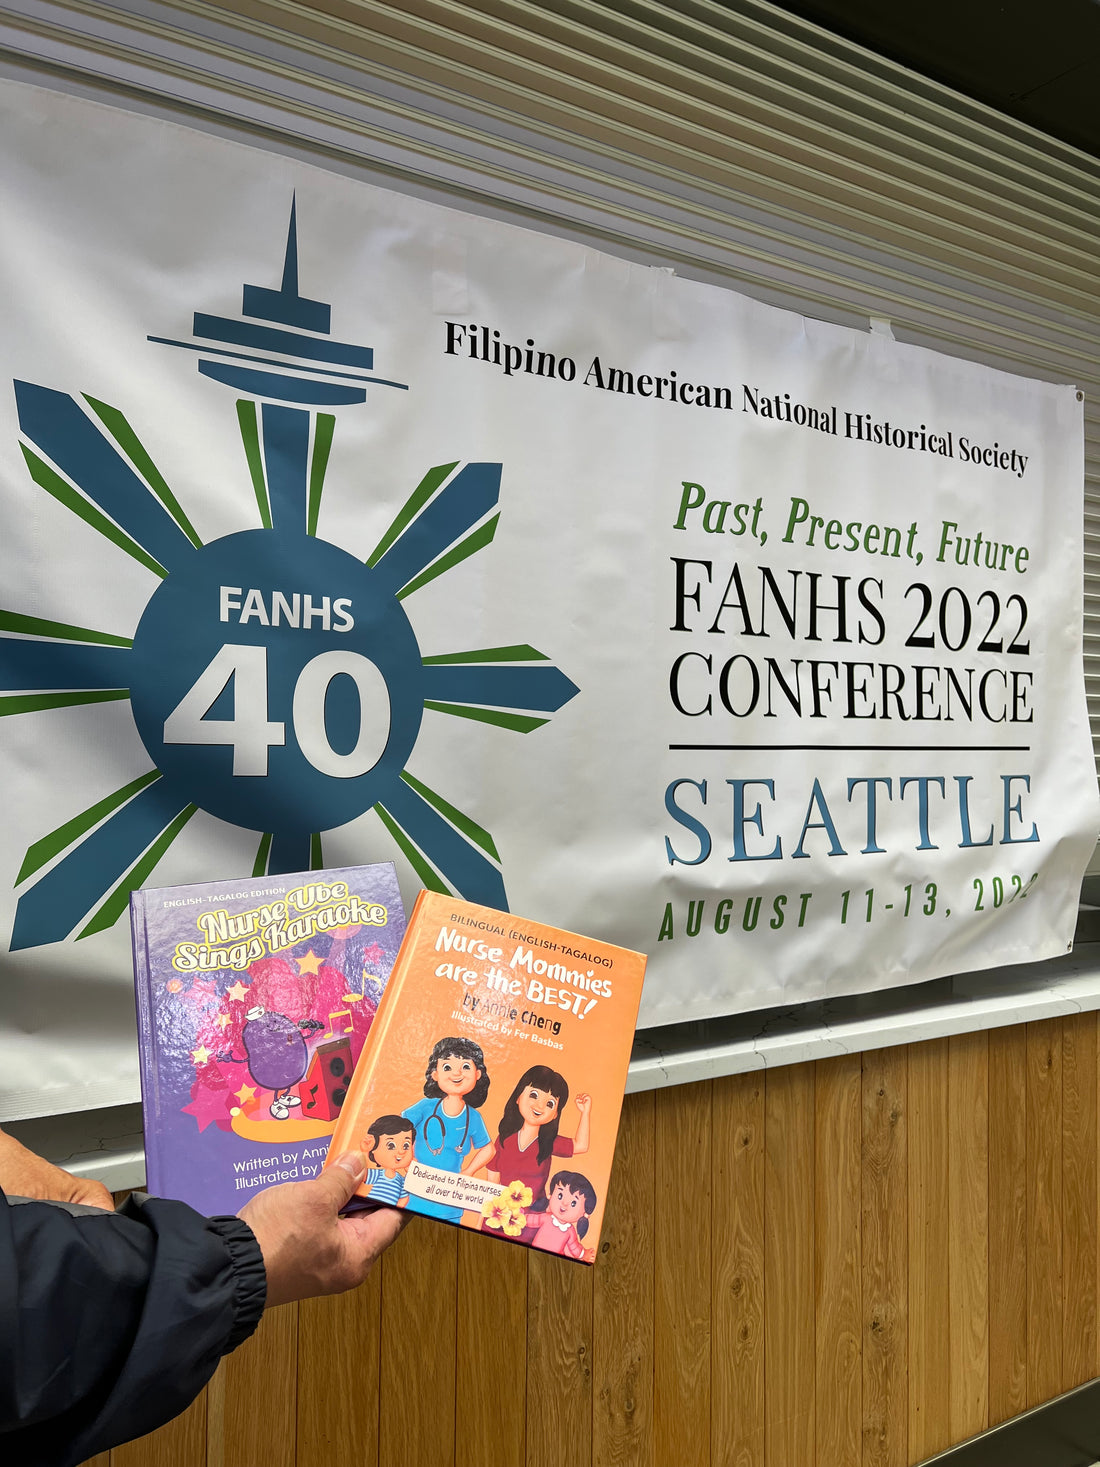 FANHS Conference 2022 at Seattle University (with NAFCONWA)